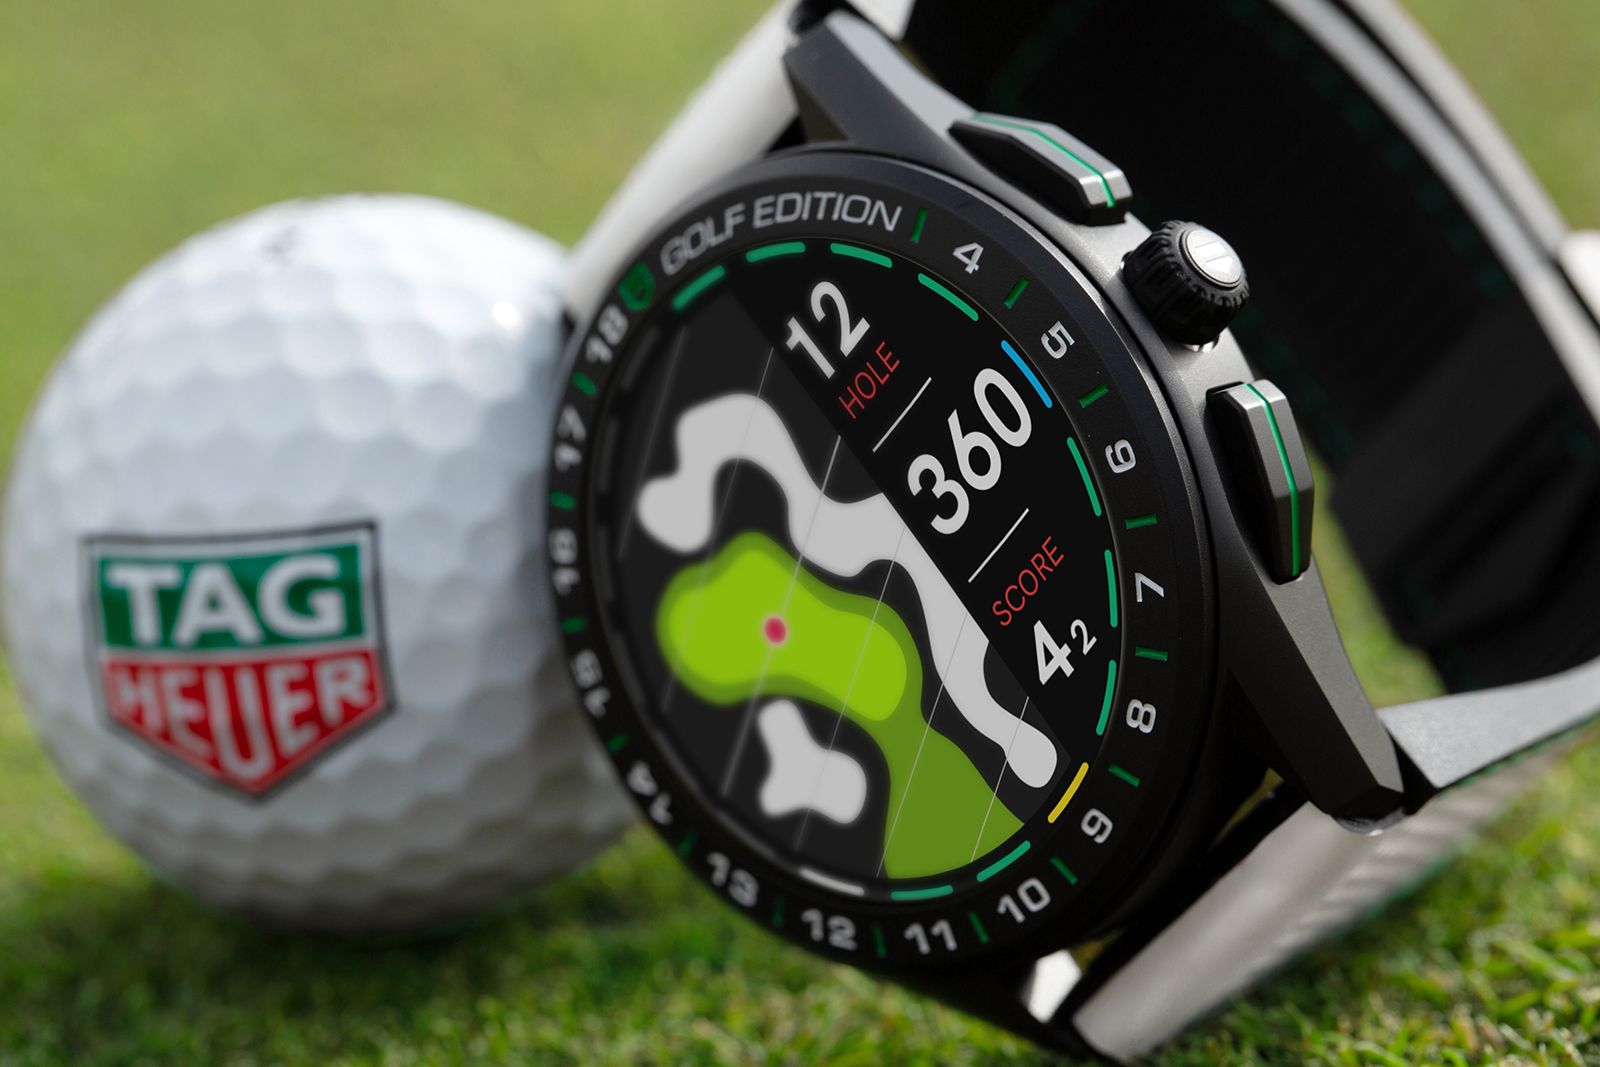 Tag Heuer Golf Edition smartwatch updated for 2020 image 1